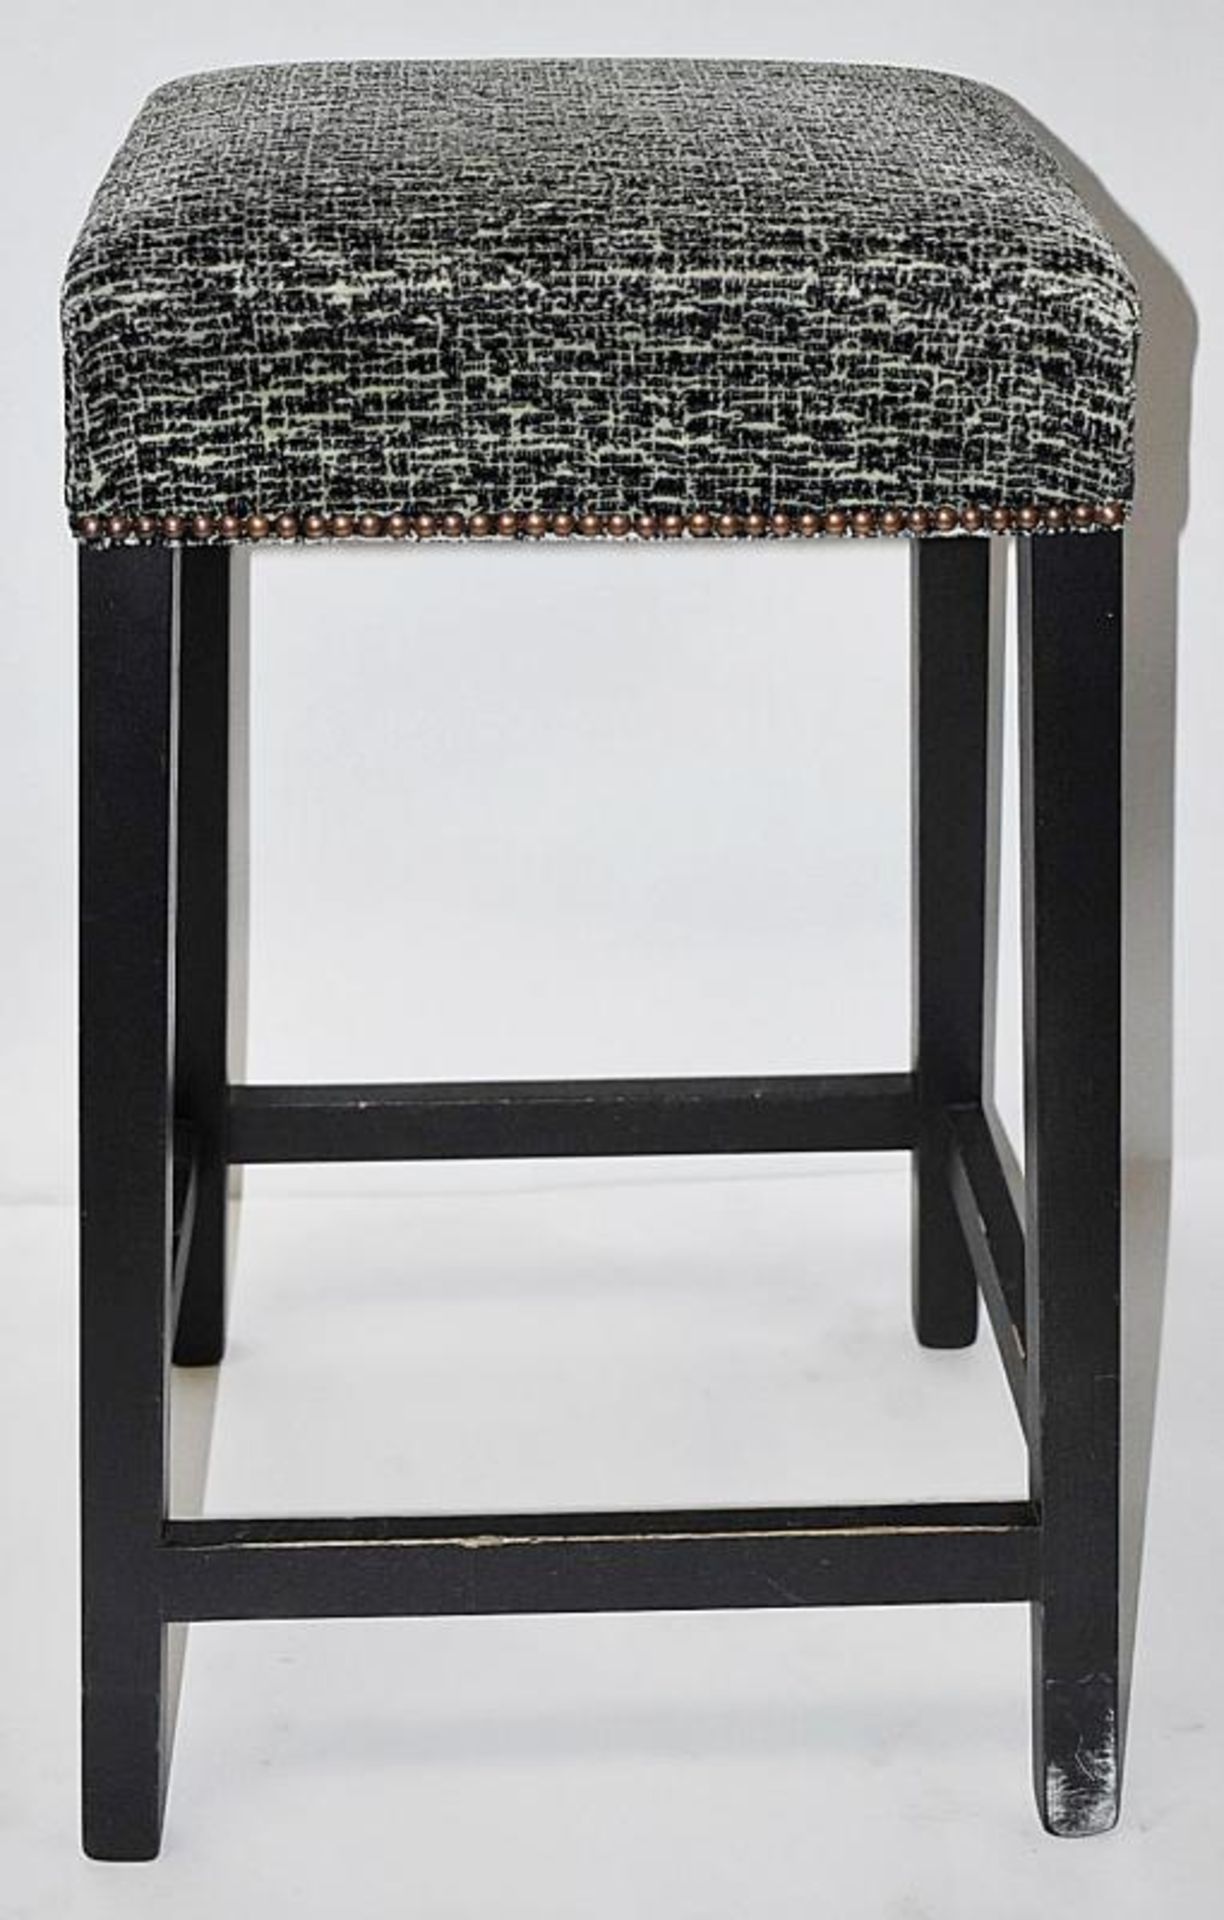 1 x Contemporary Bar Stool Upholstered In A Chic Designer Chenille Fabric - Recently Removed From A - Image 3 of 6